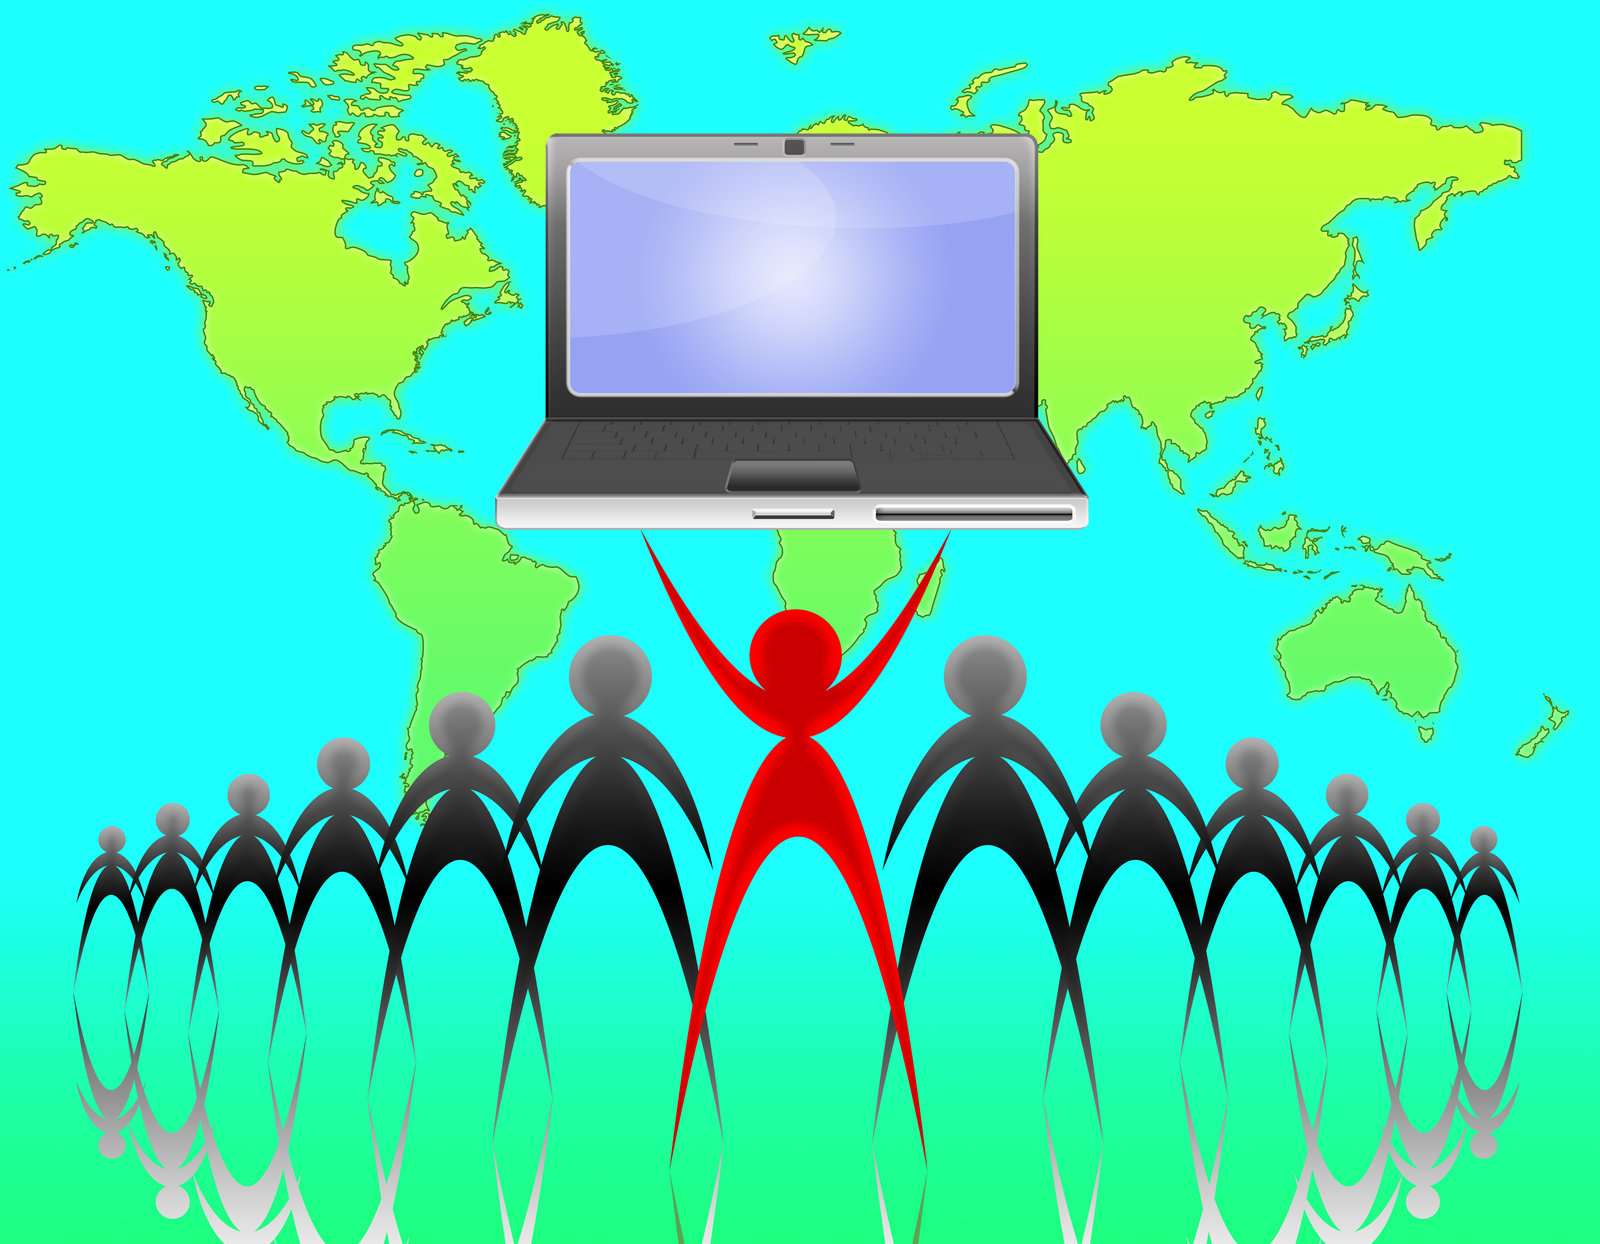 graphics of people standing together holding up a giant laptop